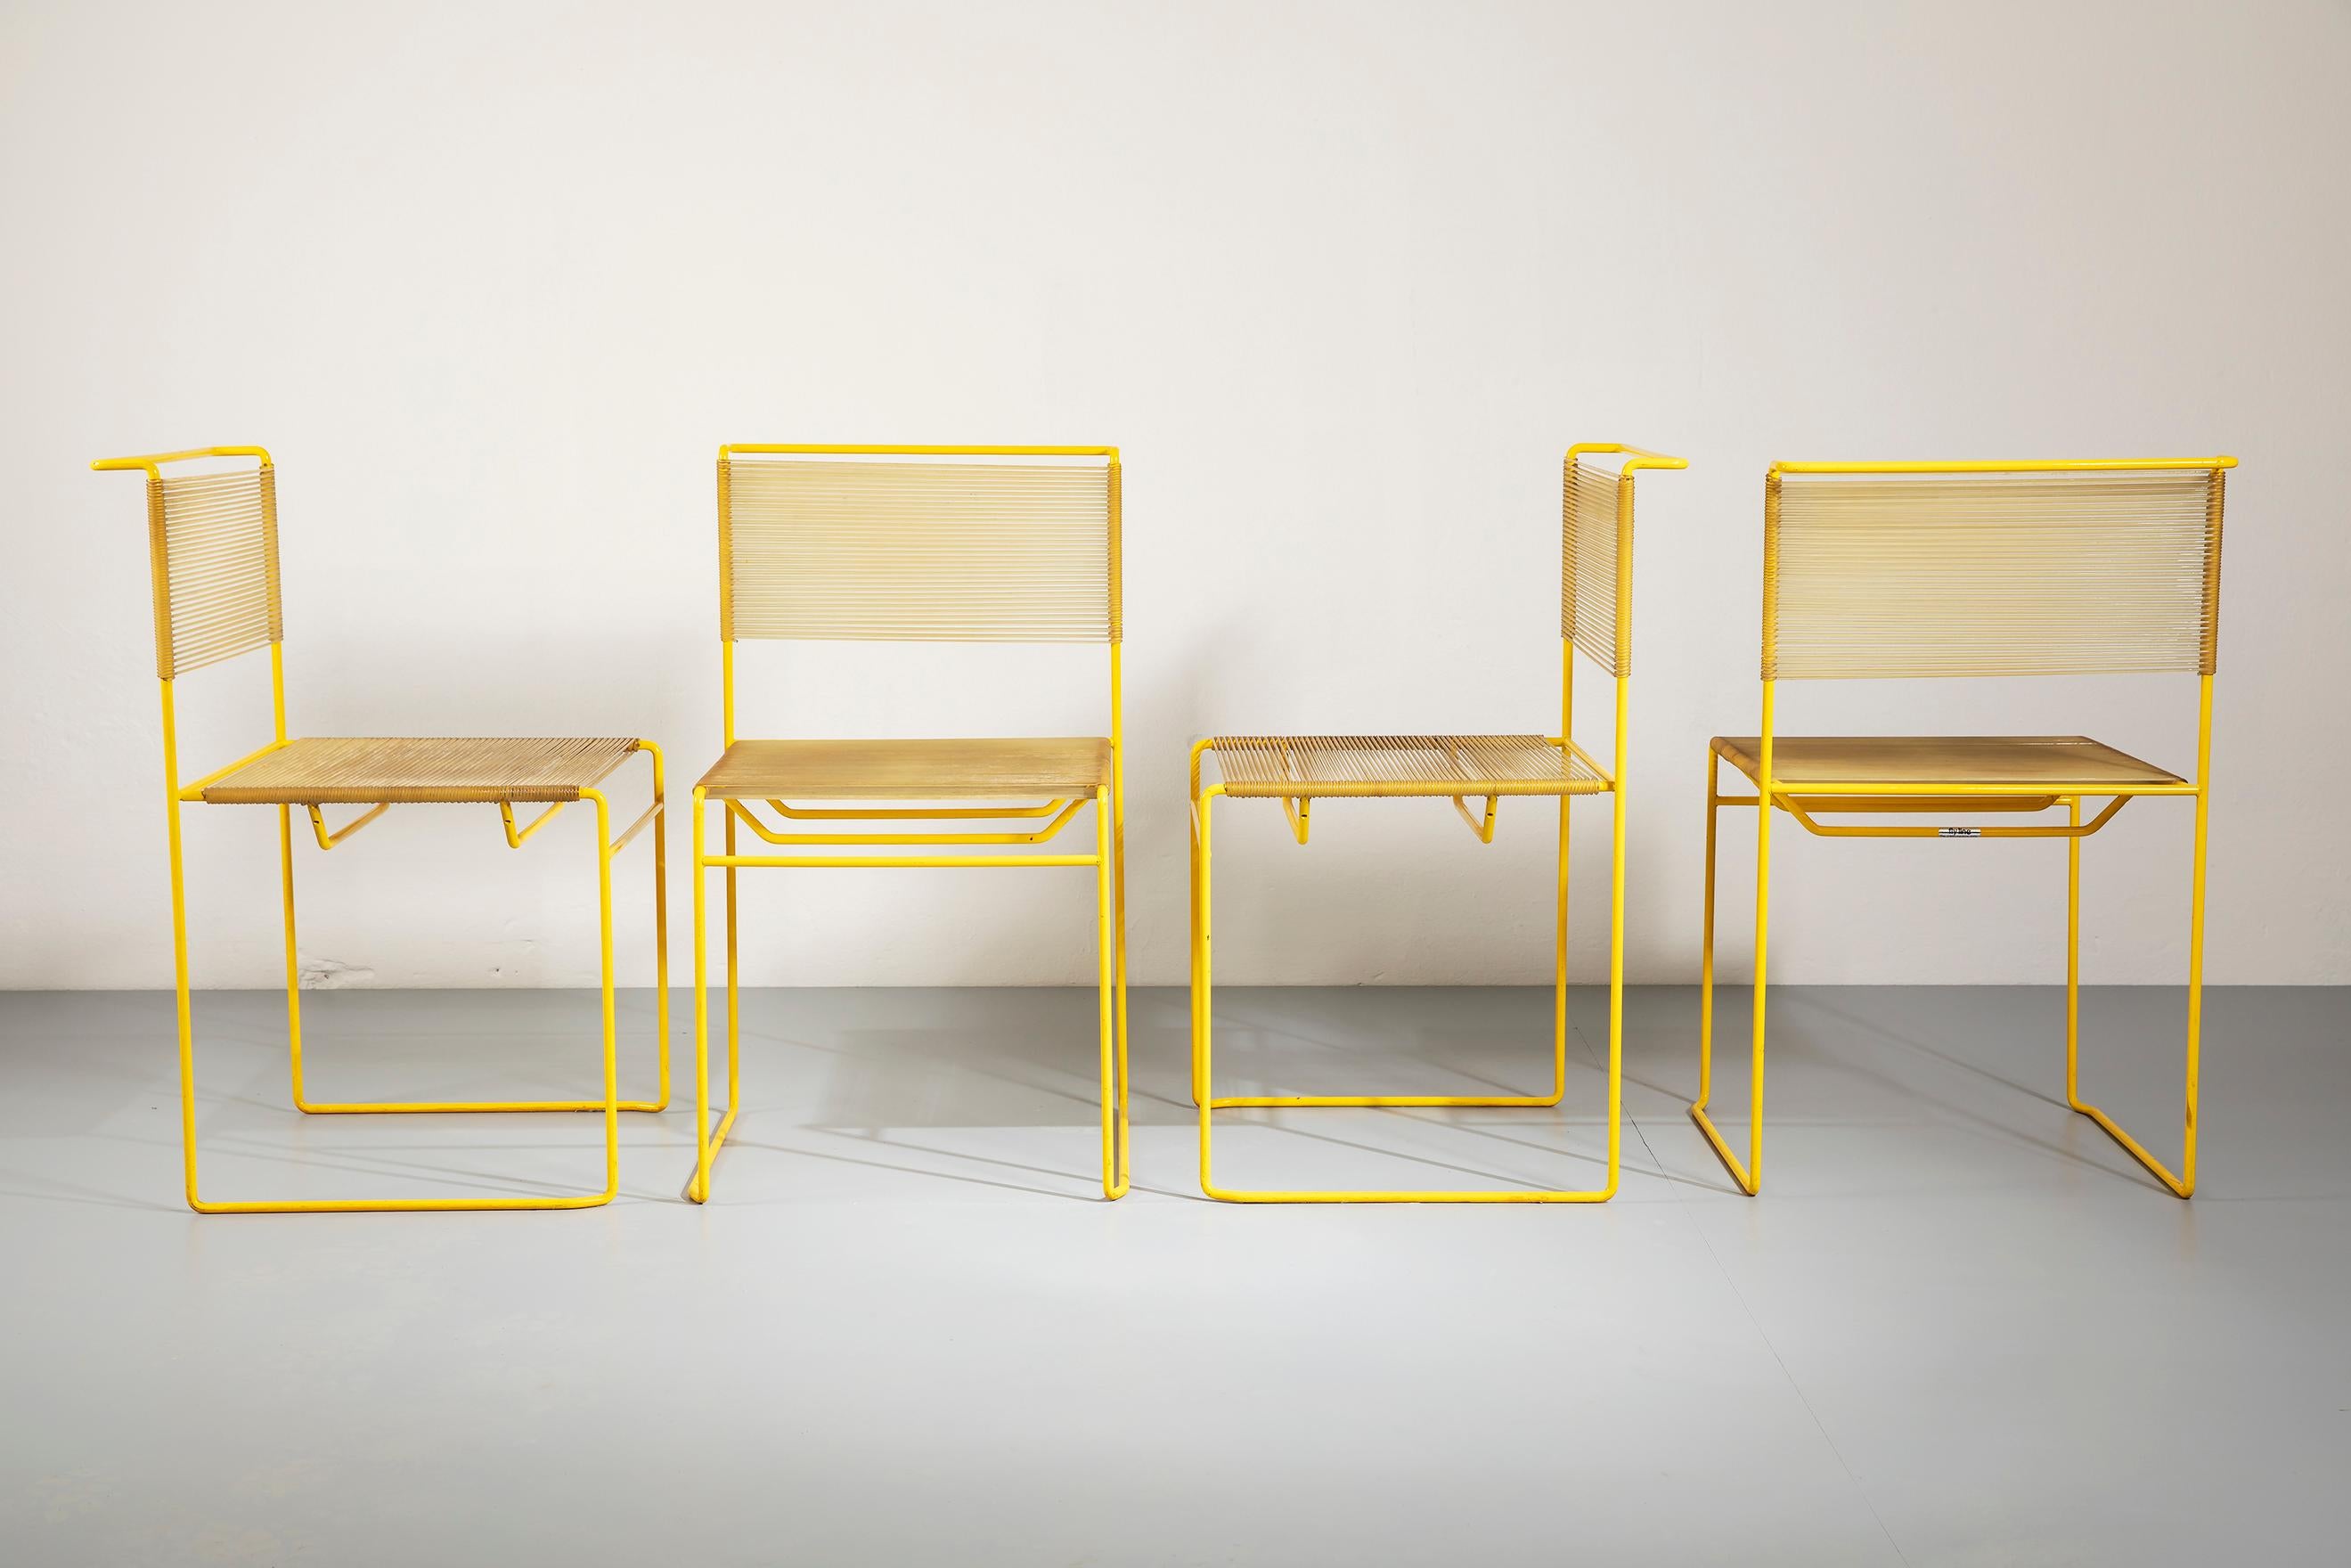 Set of four 'spaghetti' yellow lacquered steel chairs designed by Giandomenico Belotti for Fly Line in the 1970s.

Giandomenico Belotti
(1922-2004) after graduating in architecture from the University of Venice, he began working in research,